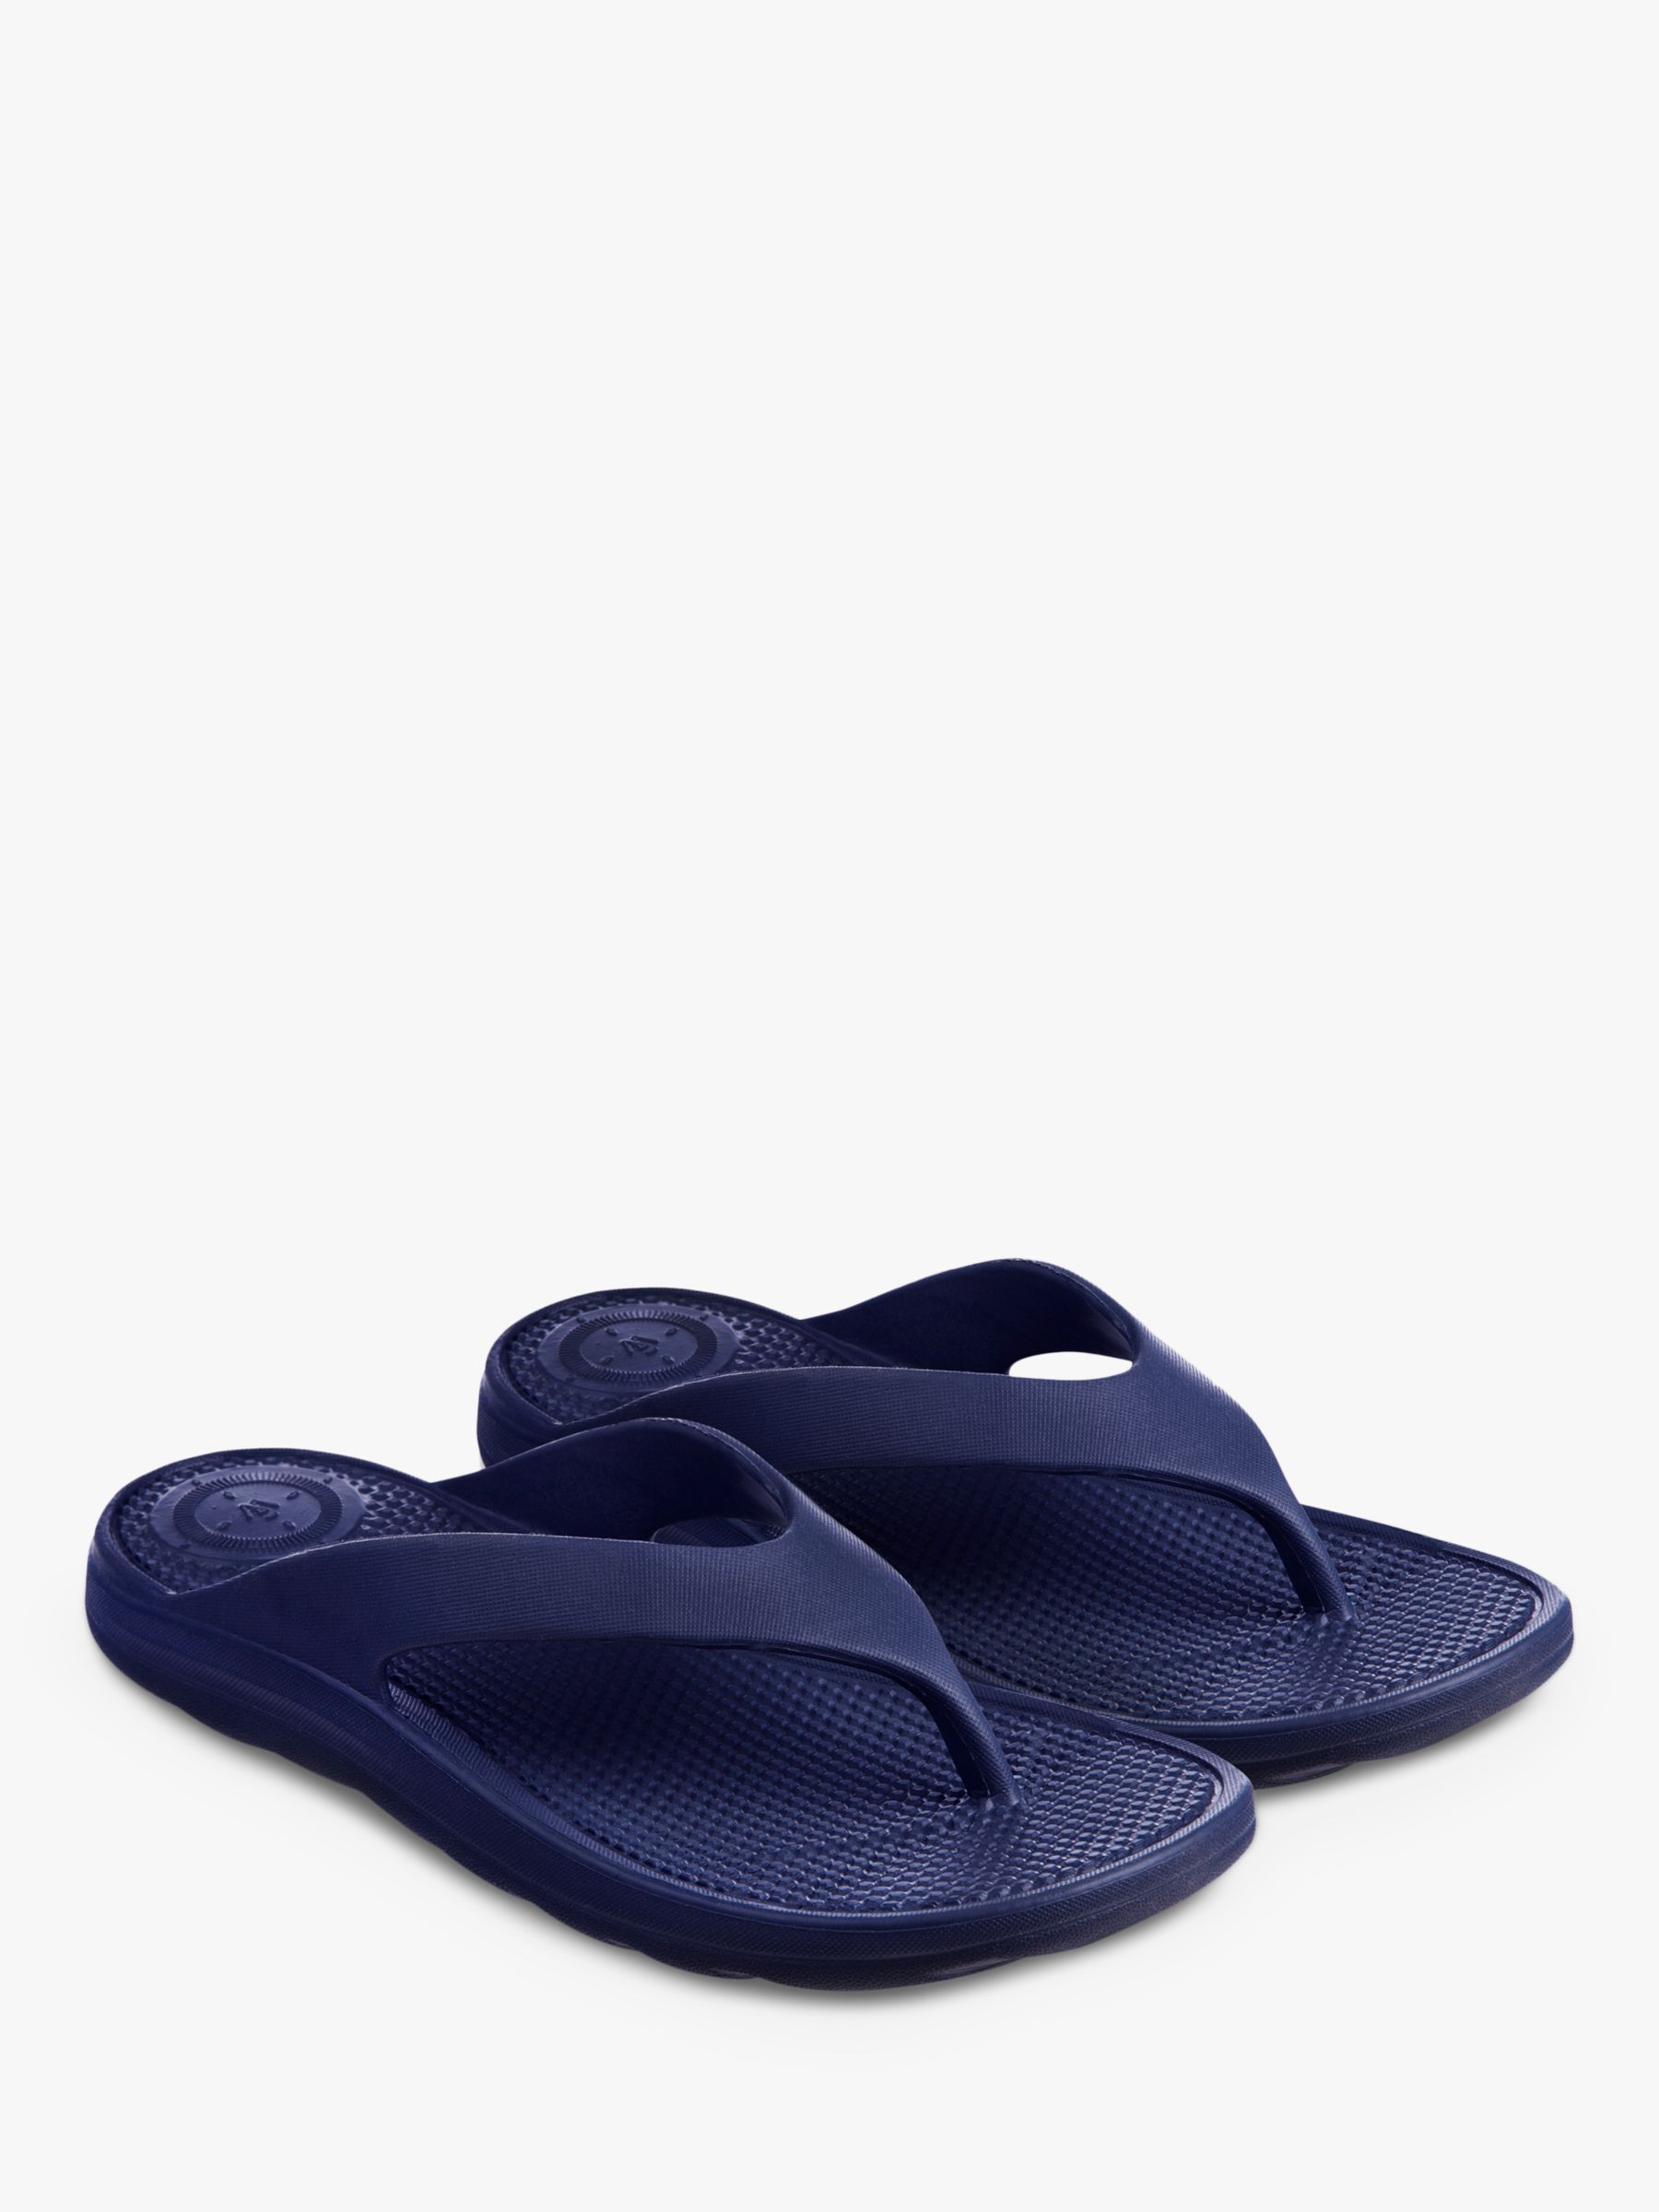 totes SOLBOUNCE Toe Post Sandals, Blue at John Lewis & Partners